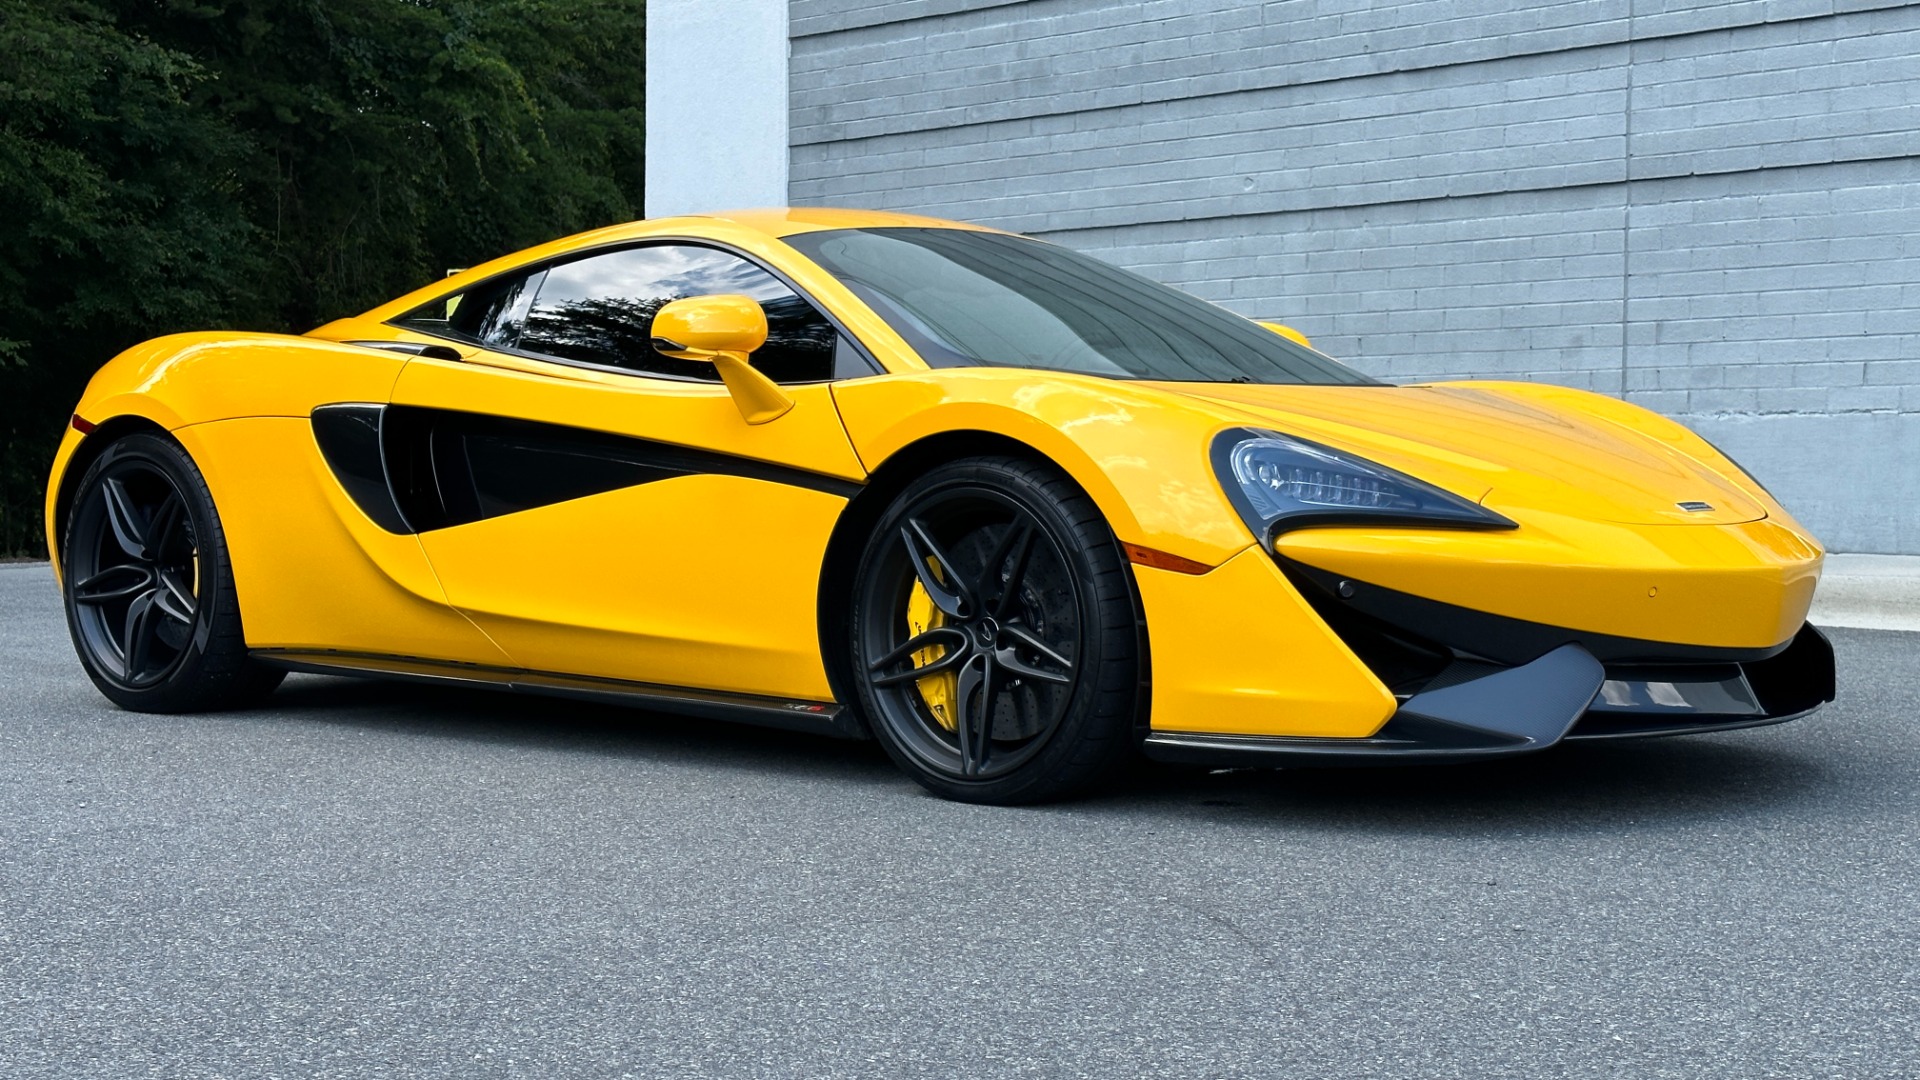 Used 2016 McLaren 570S COUPE / FULL PAINT PROTECTION / NEW TIRES / VOLCANO YELLOW for sale $156,995 at Formula Imports in Charlotte NC 28227 3